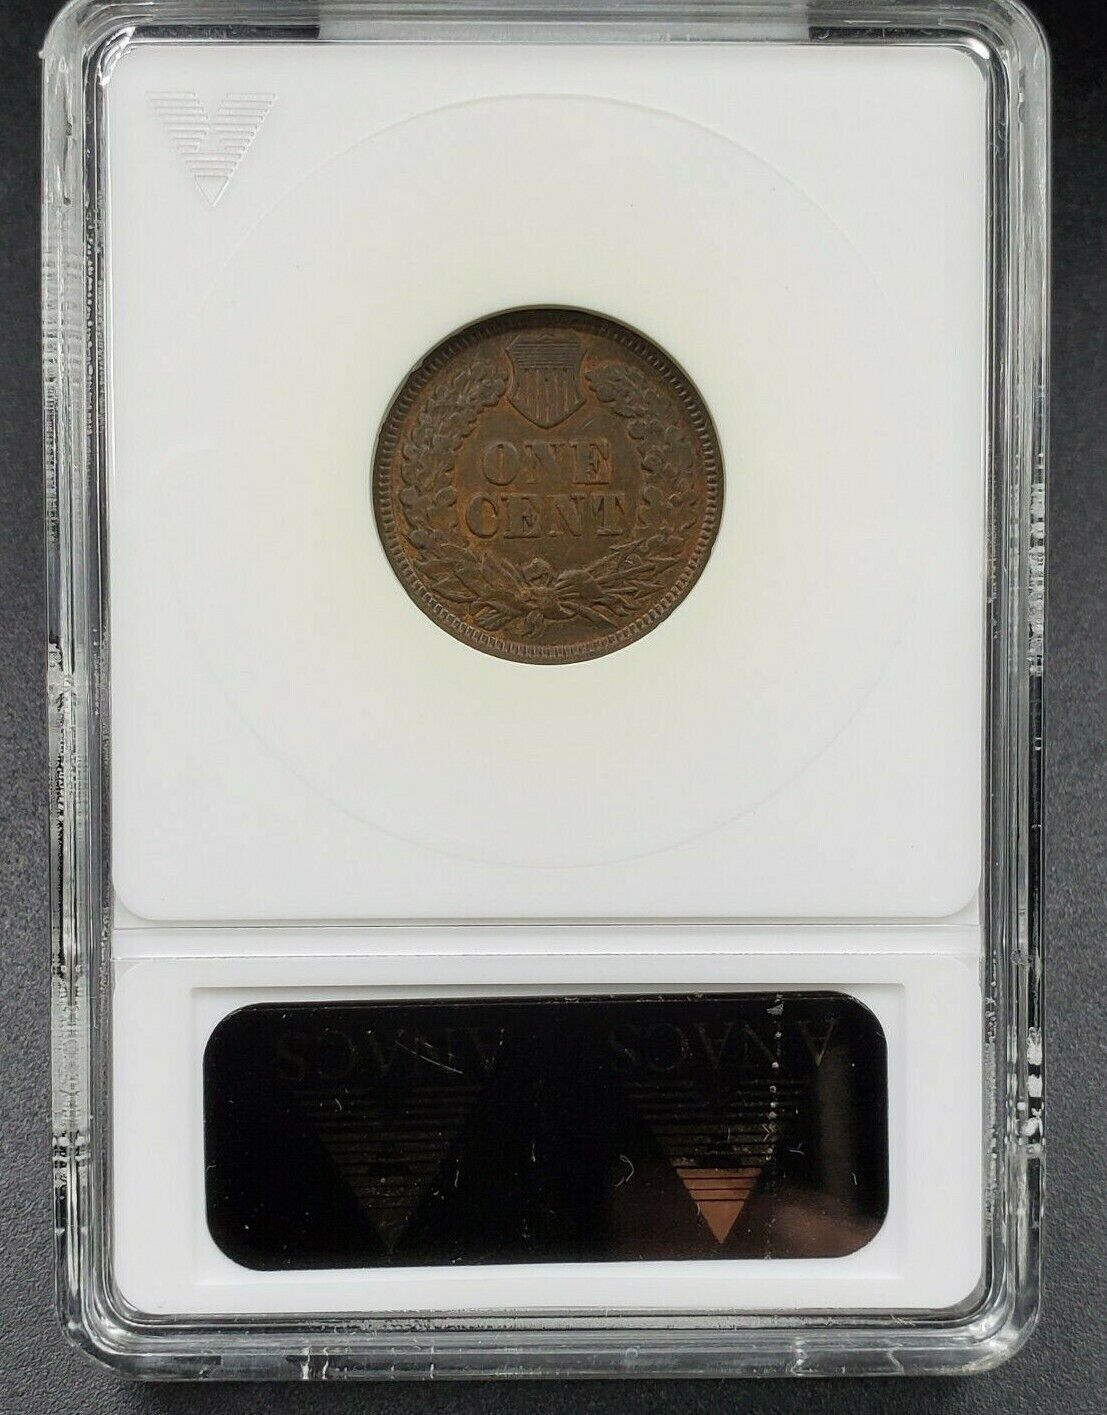 1866 Indian Cent Penny Variety Error Coin ANACS XF details FS-007.9 FS-302 RPD